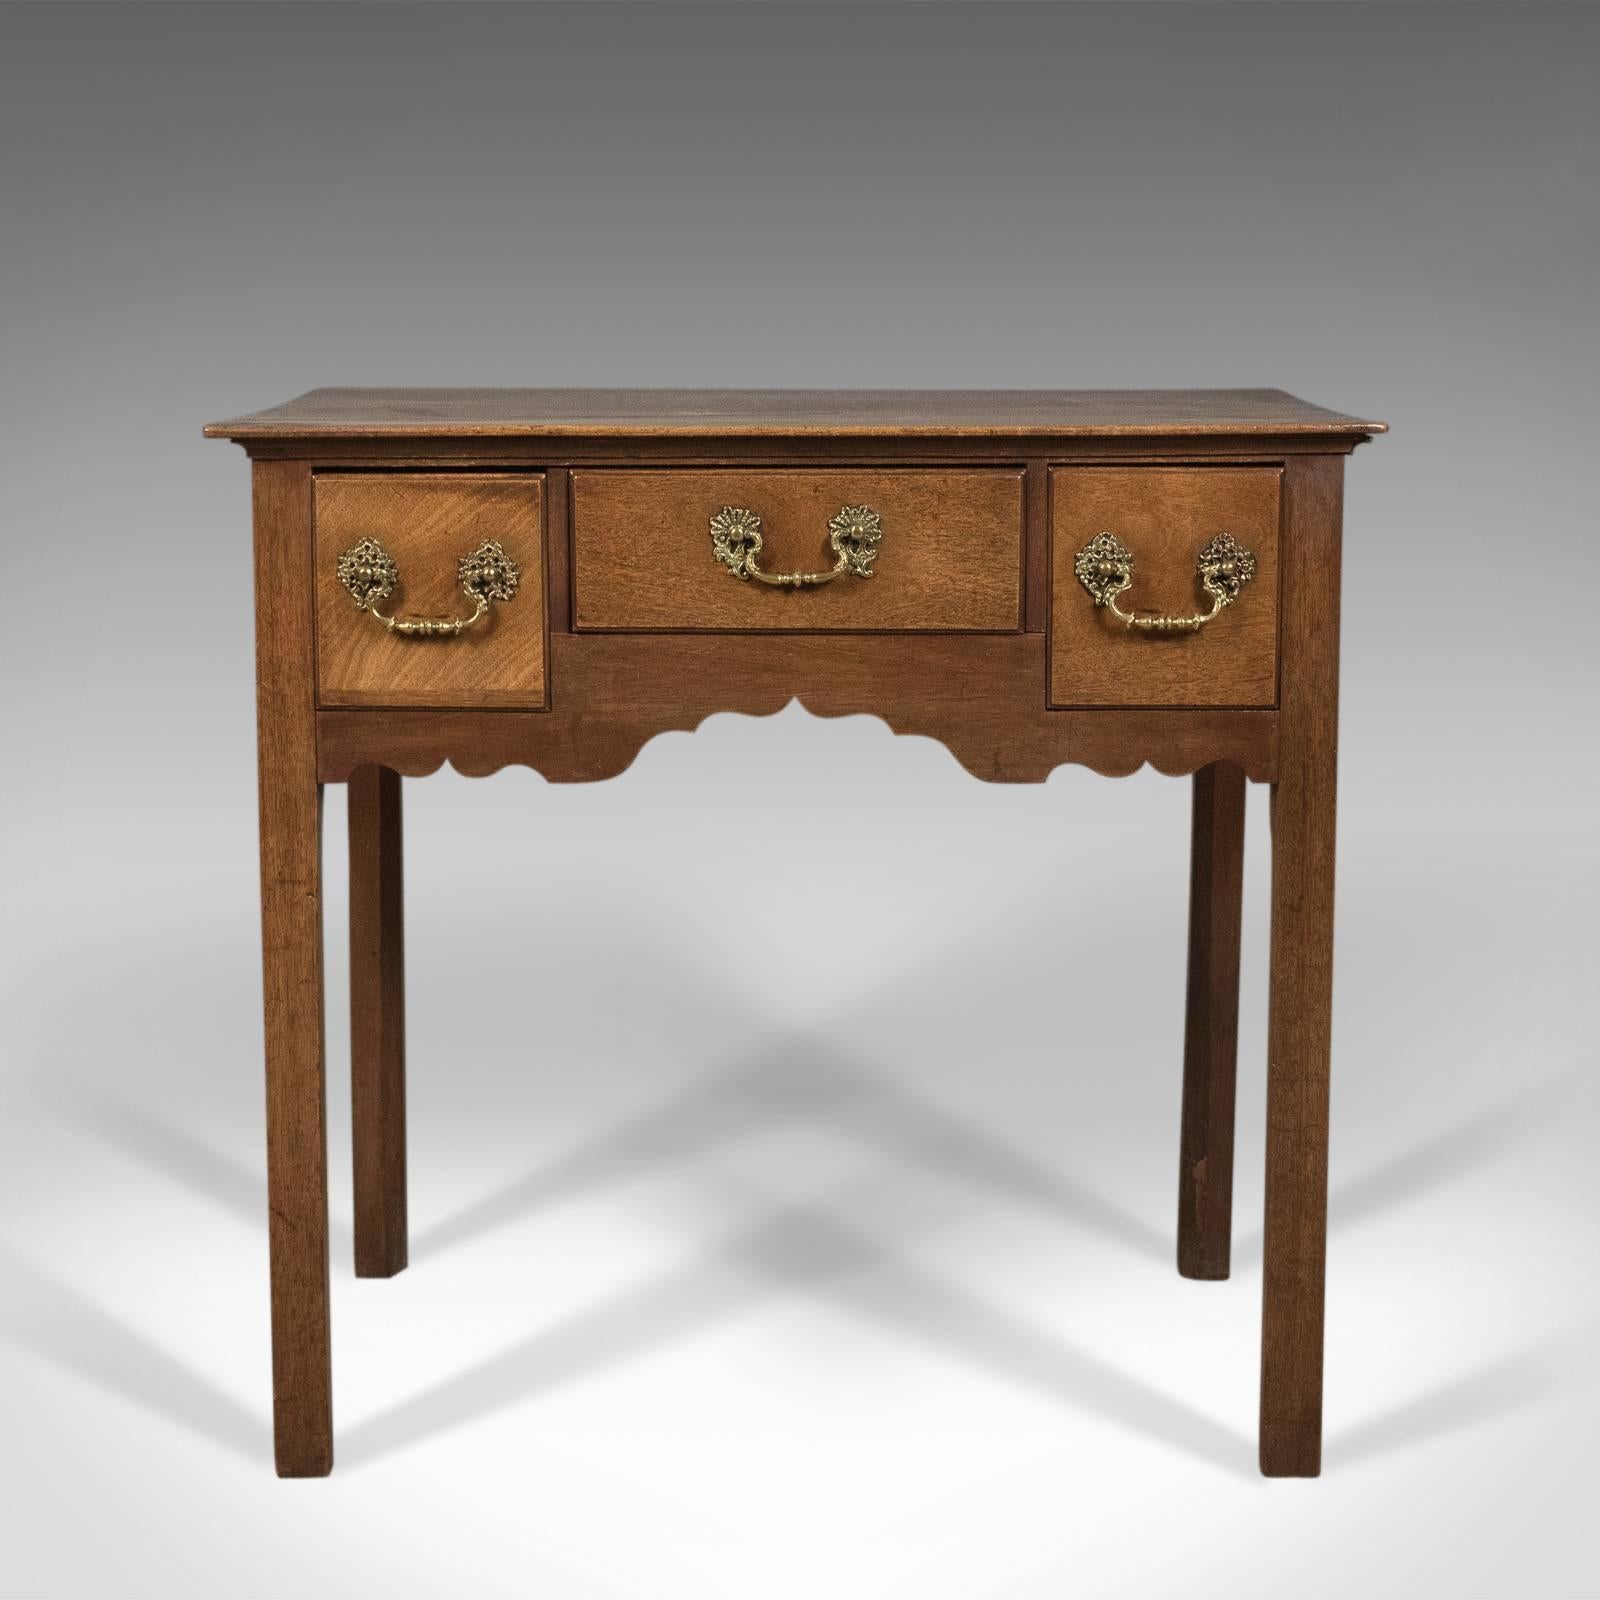 This is an antique lowboy, a mahogany, English, Victorian side table dating to circa 1900 in the Georgian taste.

Grain interest and desirable color to the attractive light mahogany
Lustrous shine to the wax polished finish
Raised on square